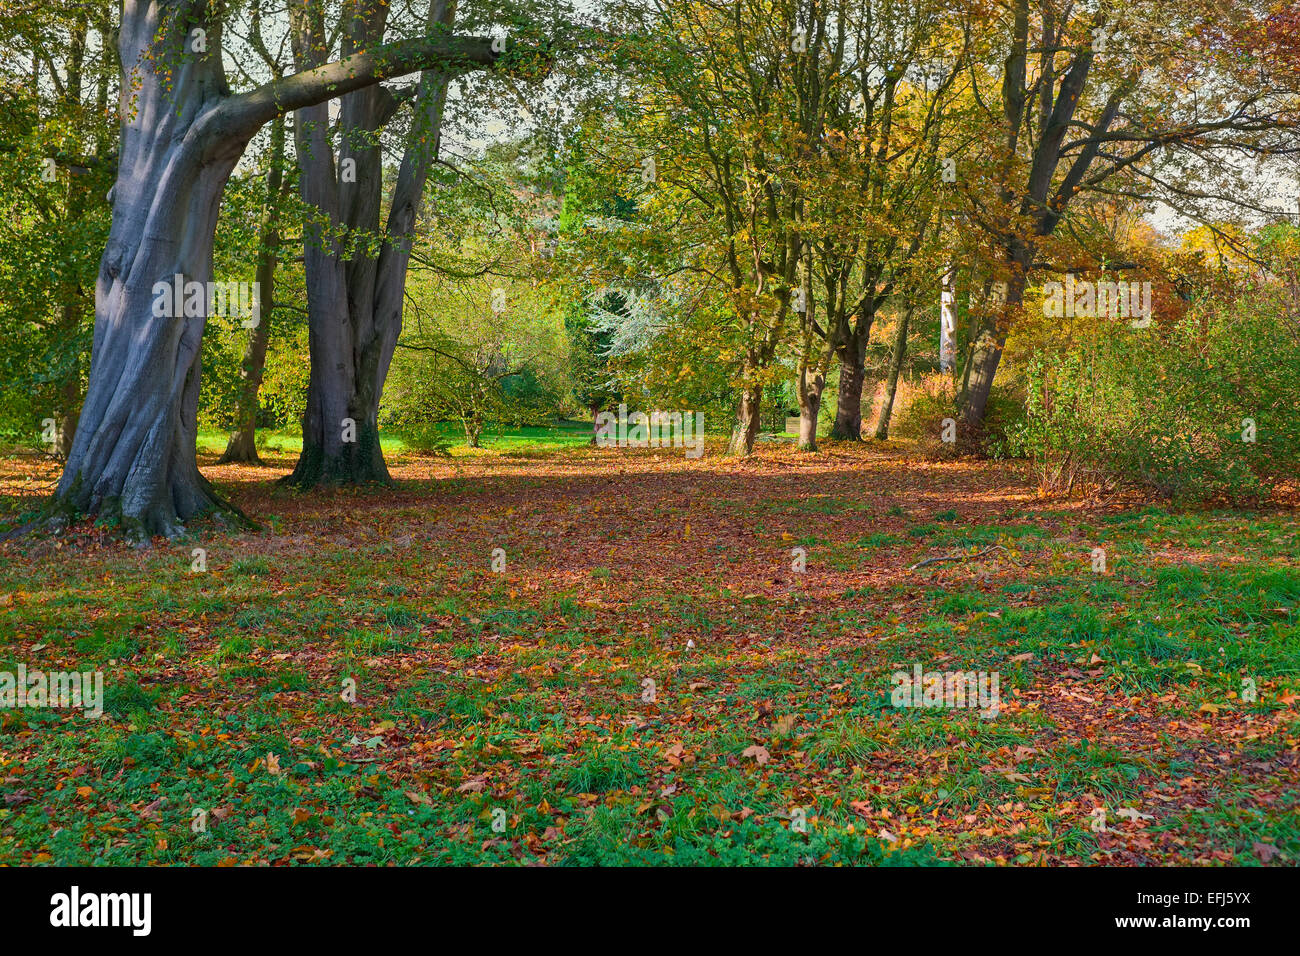 Colourful colorful red-orange autumn fall autumnal leaves in a grassy woodland. Stock Photo